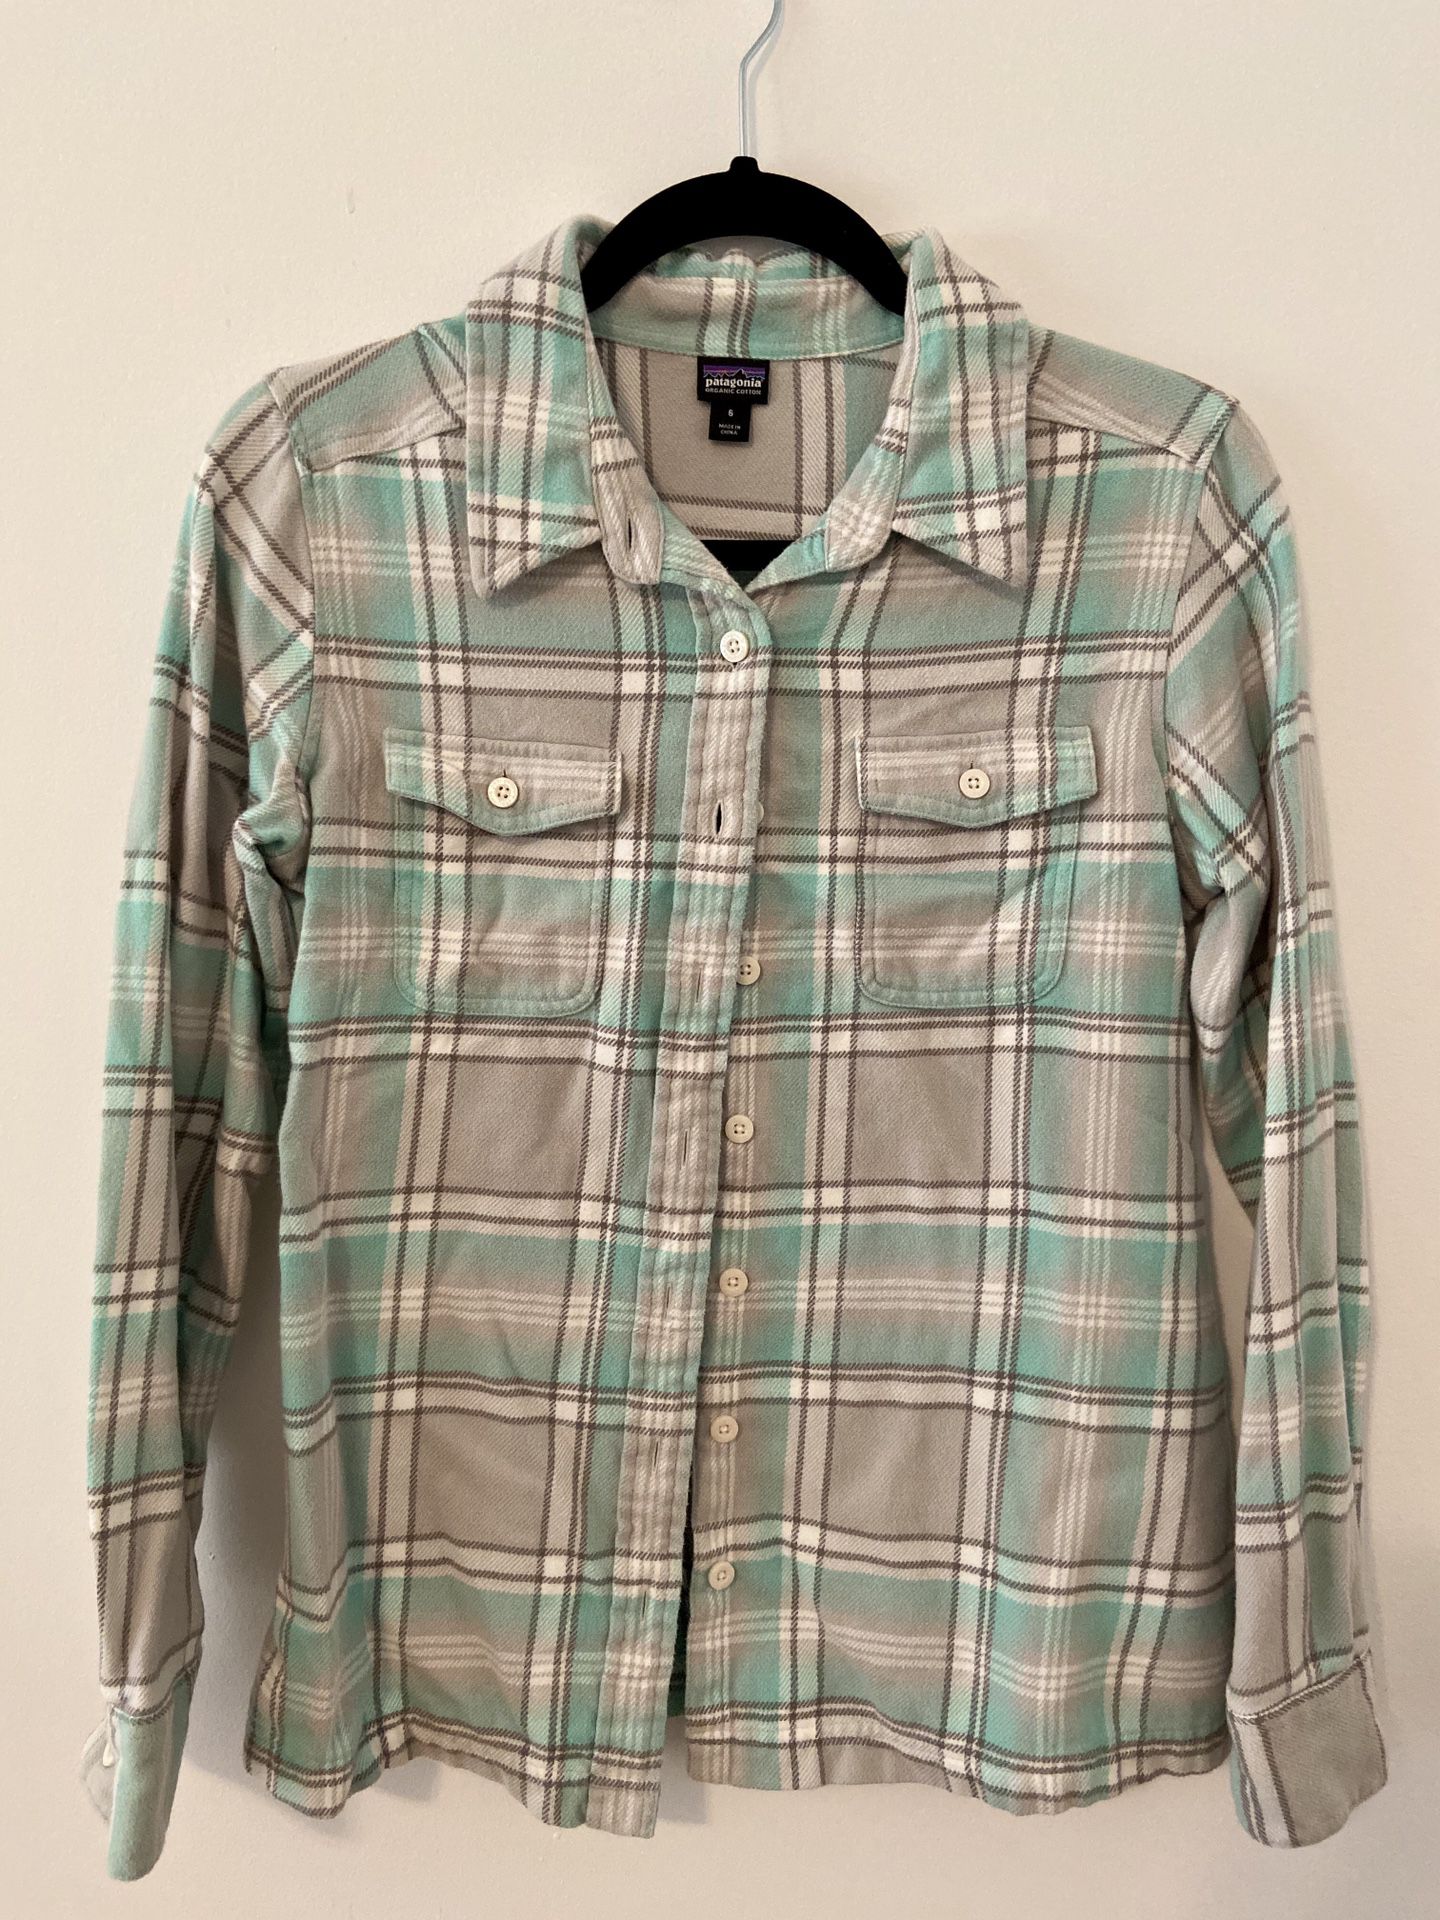 Patagonia Woman’s Flannel Shirt Size 6